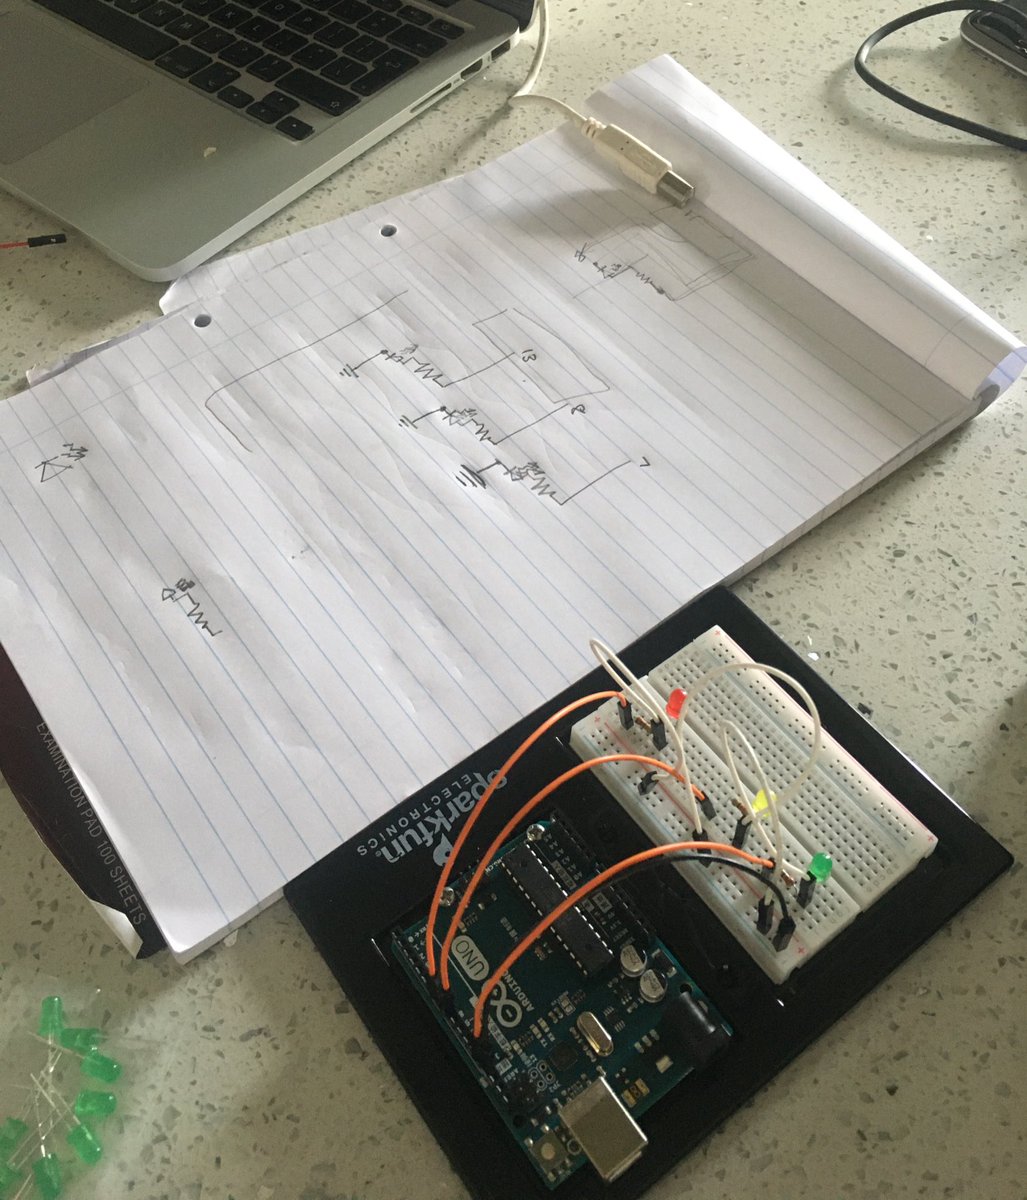 Day 2, and they’ve learned how to draw their own basic schematic, build it on a breadboard, and write some code. Stay at home learning is actually not too bad (current circumstances aside).  #homeschool  #StayHome    #schoolclosure